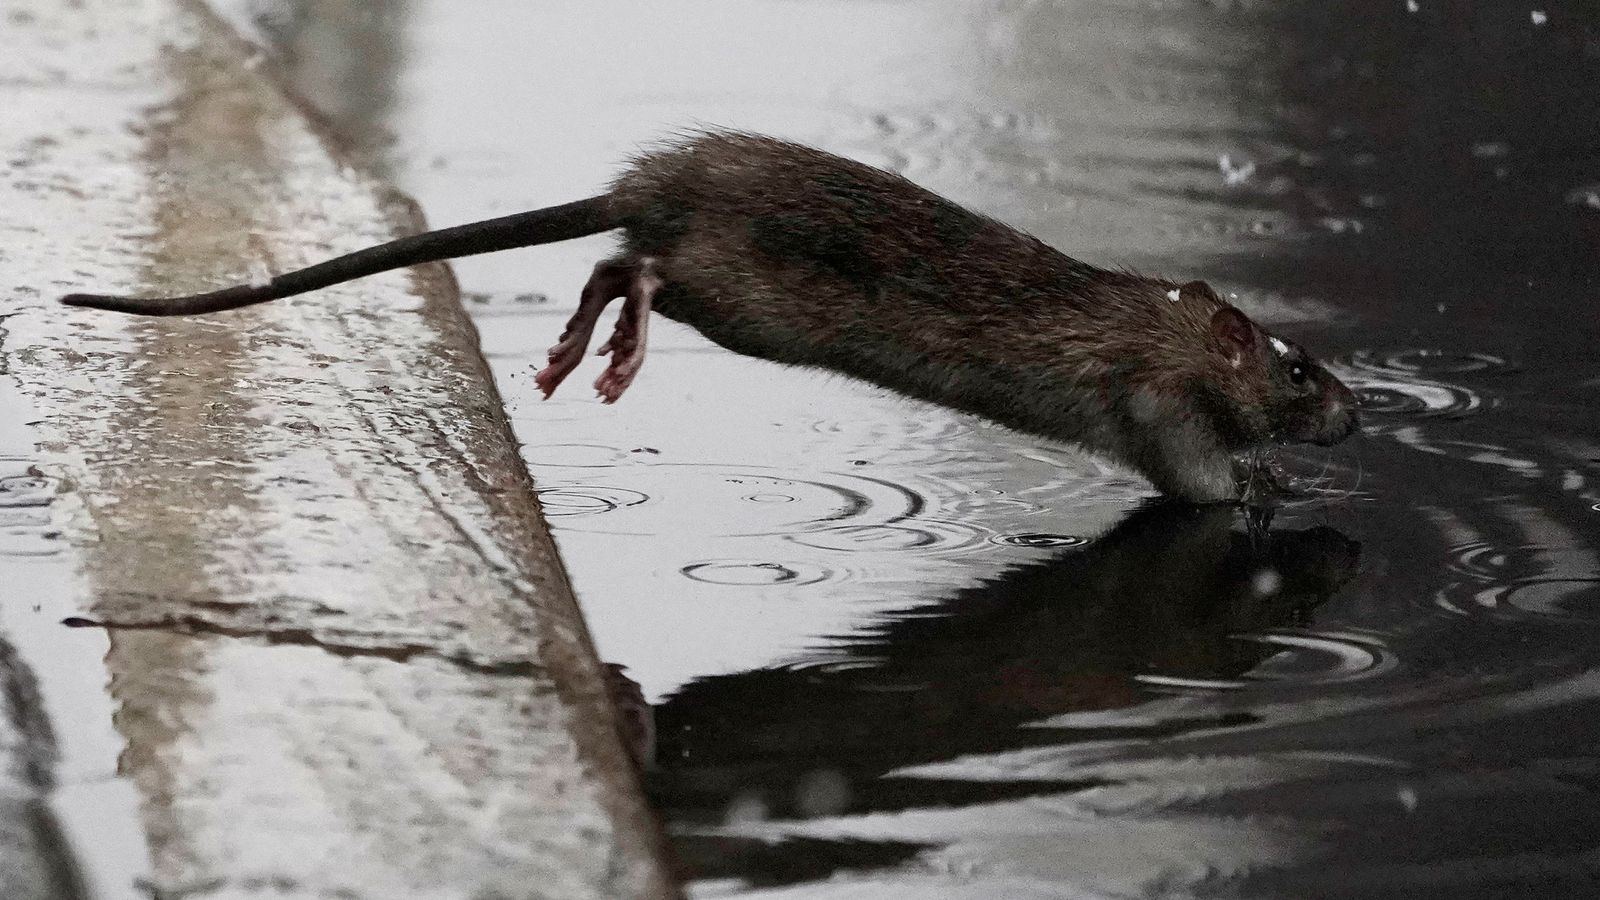 New York City appoints ‘rat czar’ to guide ‘wholesale slaughter’ of hated rodents